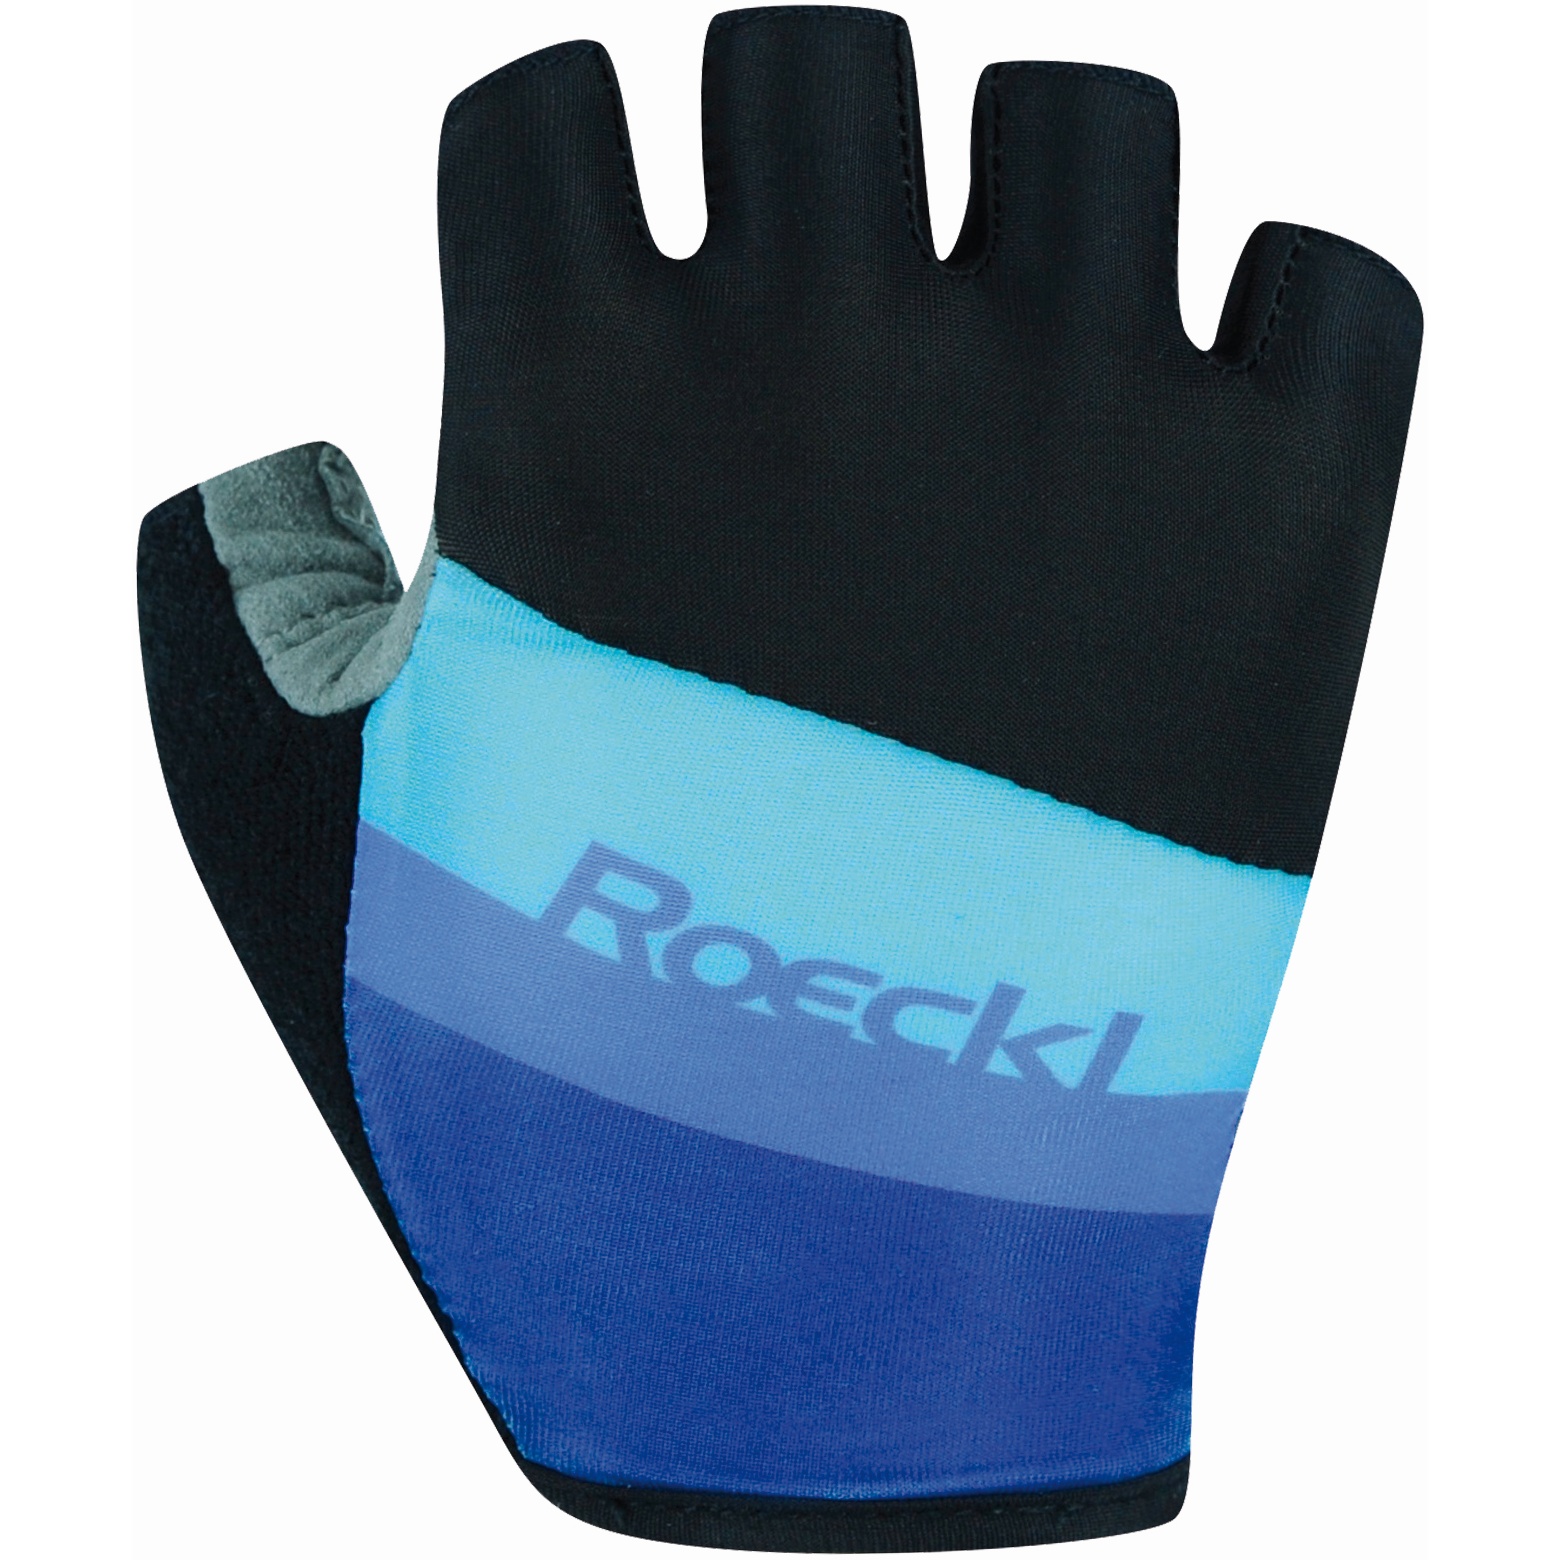 Picture of Roeckl Sports Ticino Kids Cycling Gloves - black/blue 056